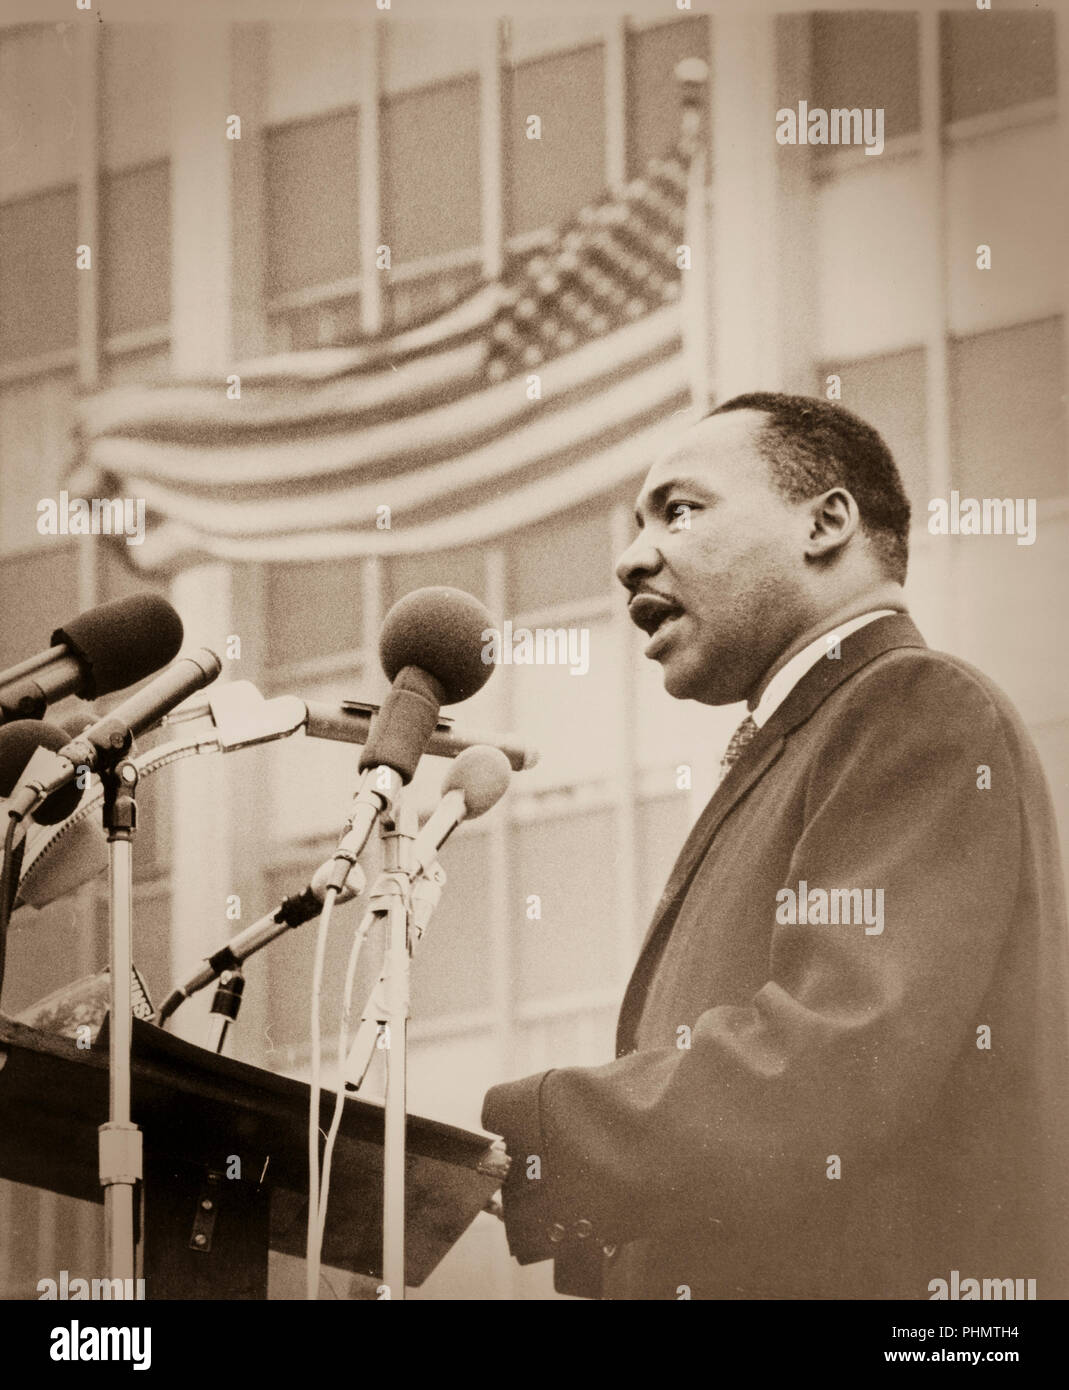 The Reverend Dr Martin Luther King Jr Stock Photo Alamy